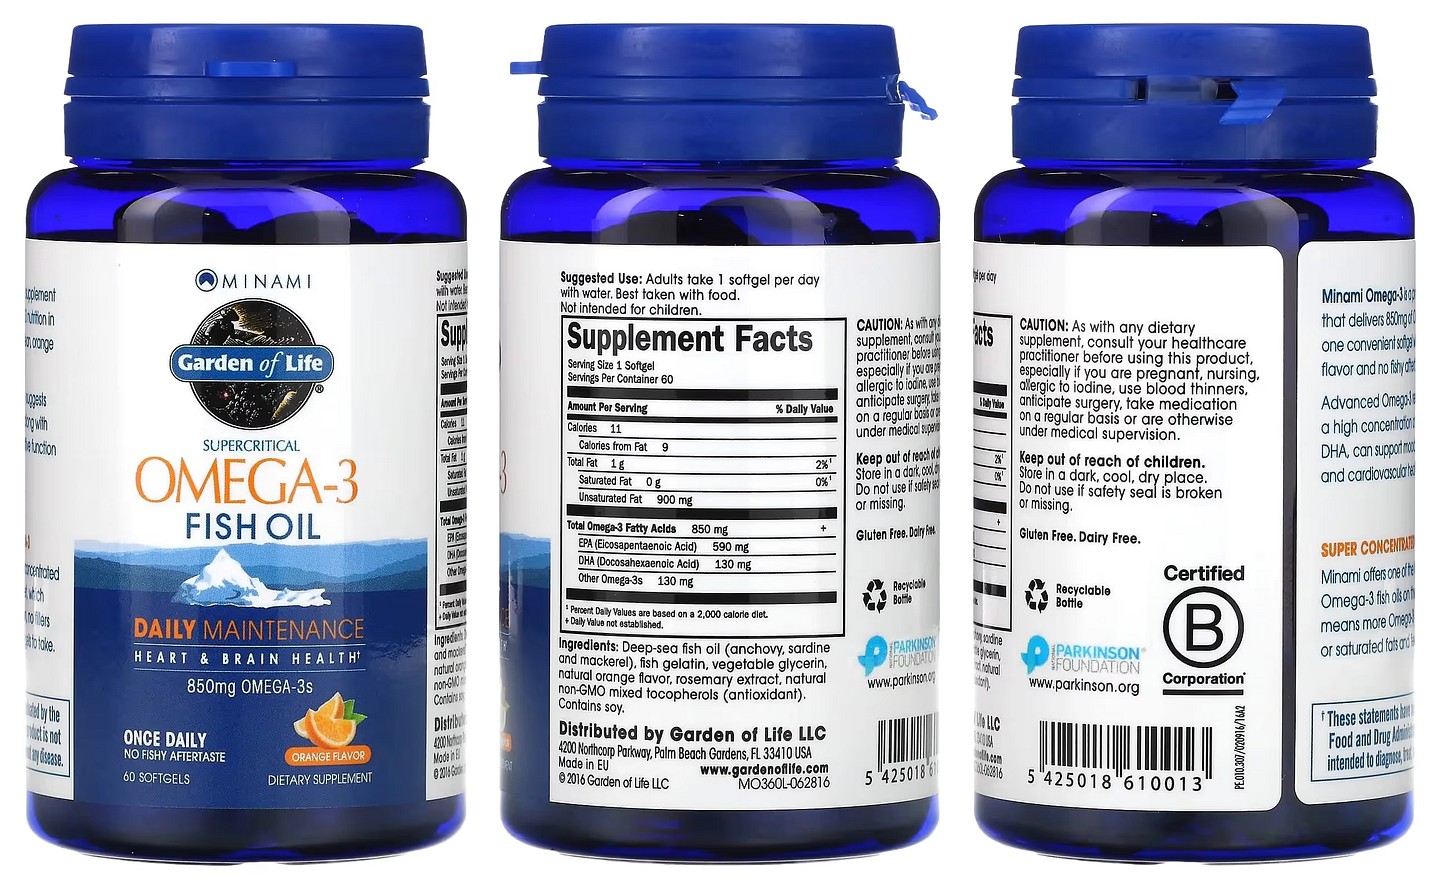 Minami Nutrition, Supercritical Omega-3 Fish Oil packaging